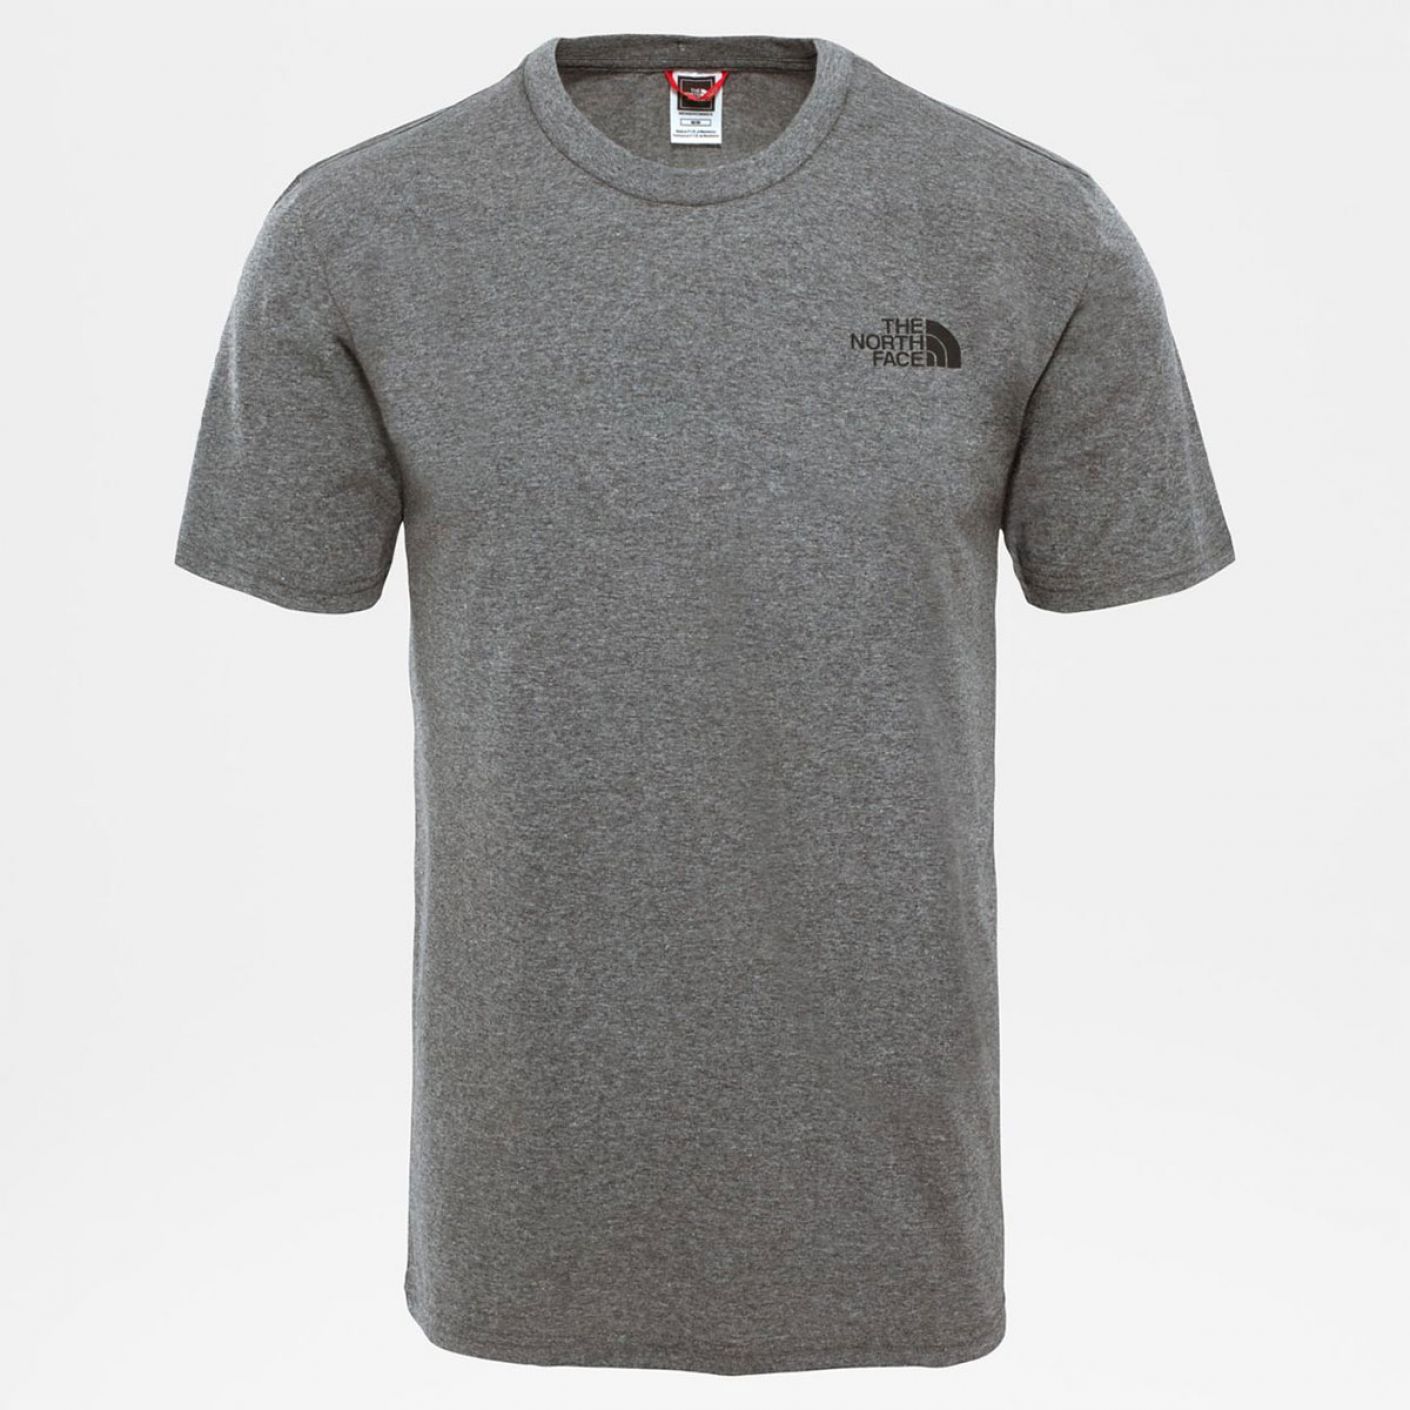 The North Face Men's Simple Dome Gray T-shirt